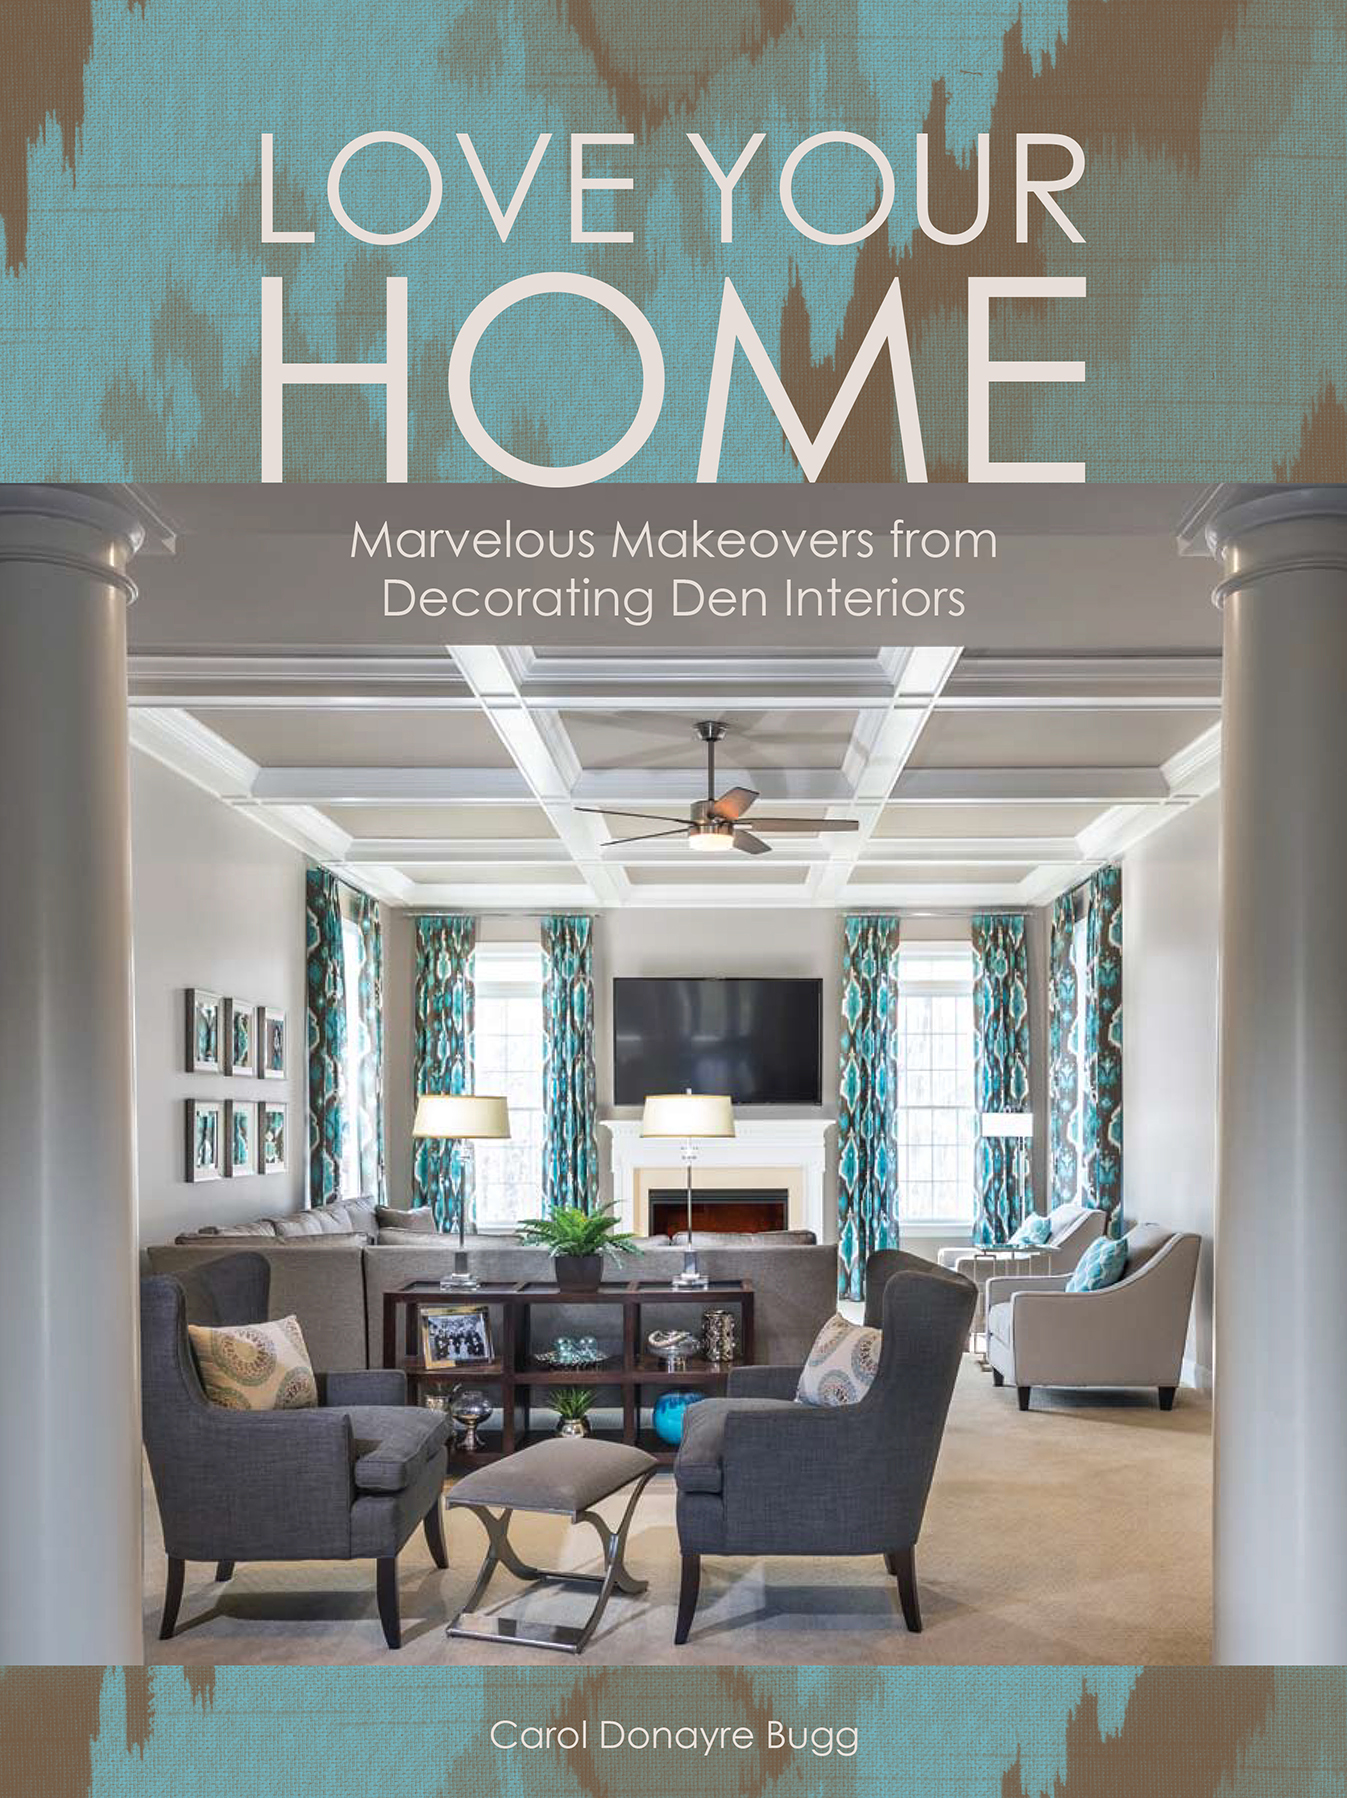 “Love Your Home” New Book Features 67 Design